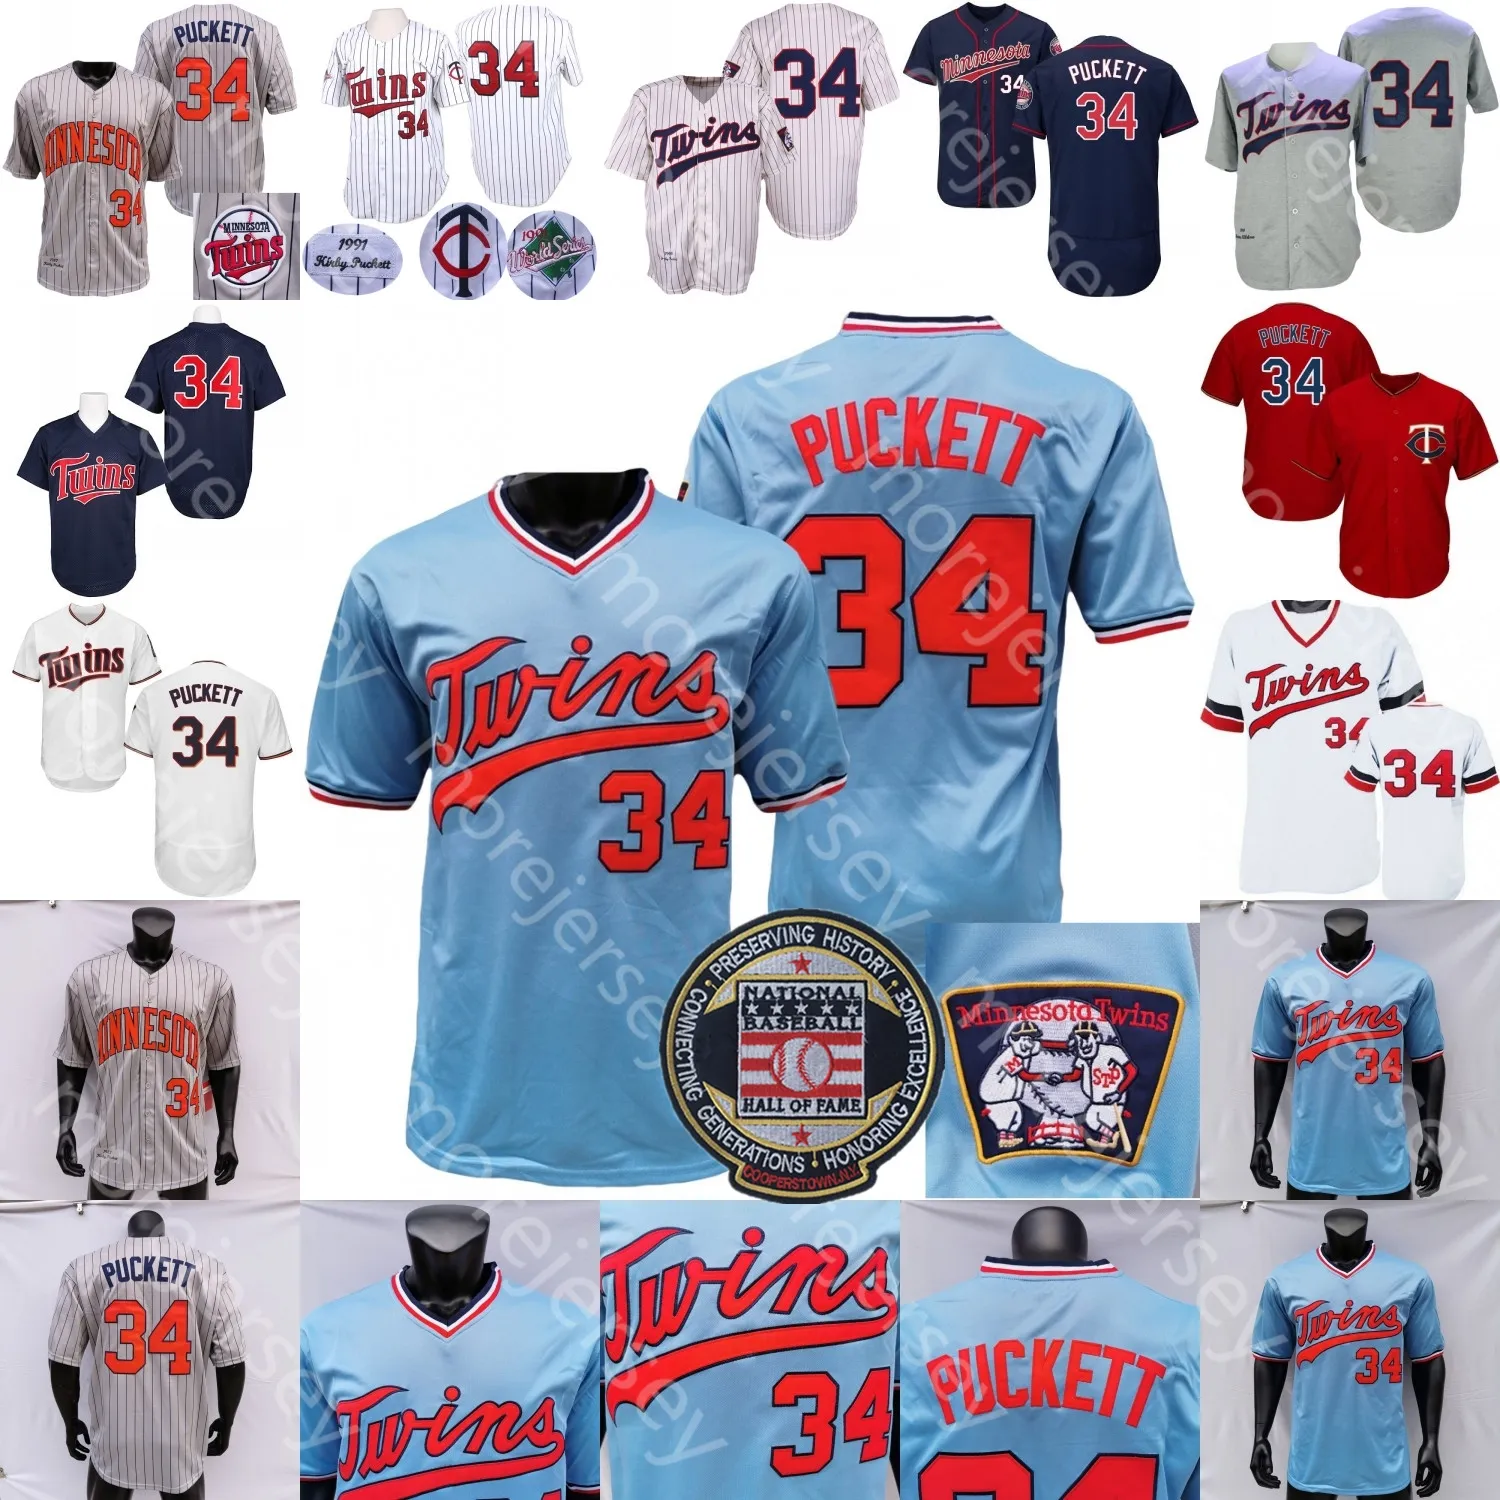 Kirby Puckett Jersey Hall Of Fame Patch 1969 Creme Branco Pinstripe Cinza Coopers-town Branco Vermelho Jogador Fãs Pulôver Azul Salute to Service Navy Mesh BP